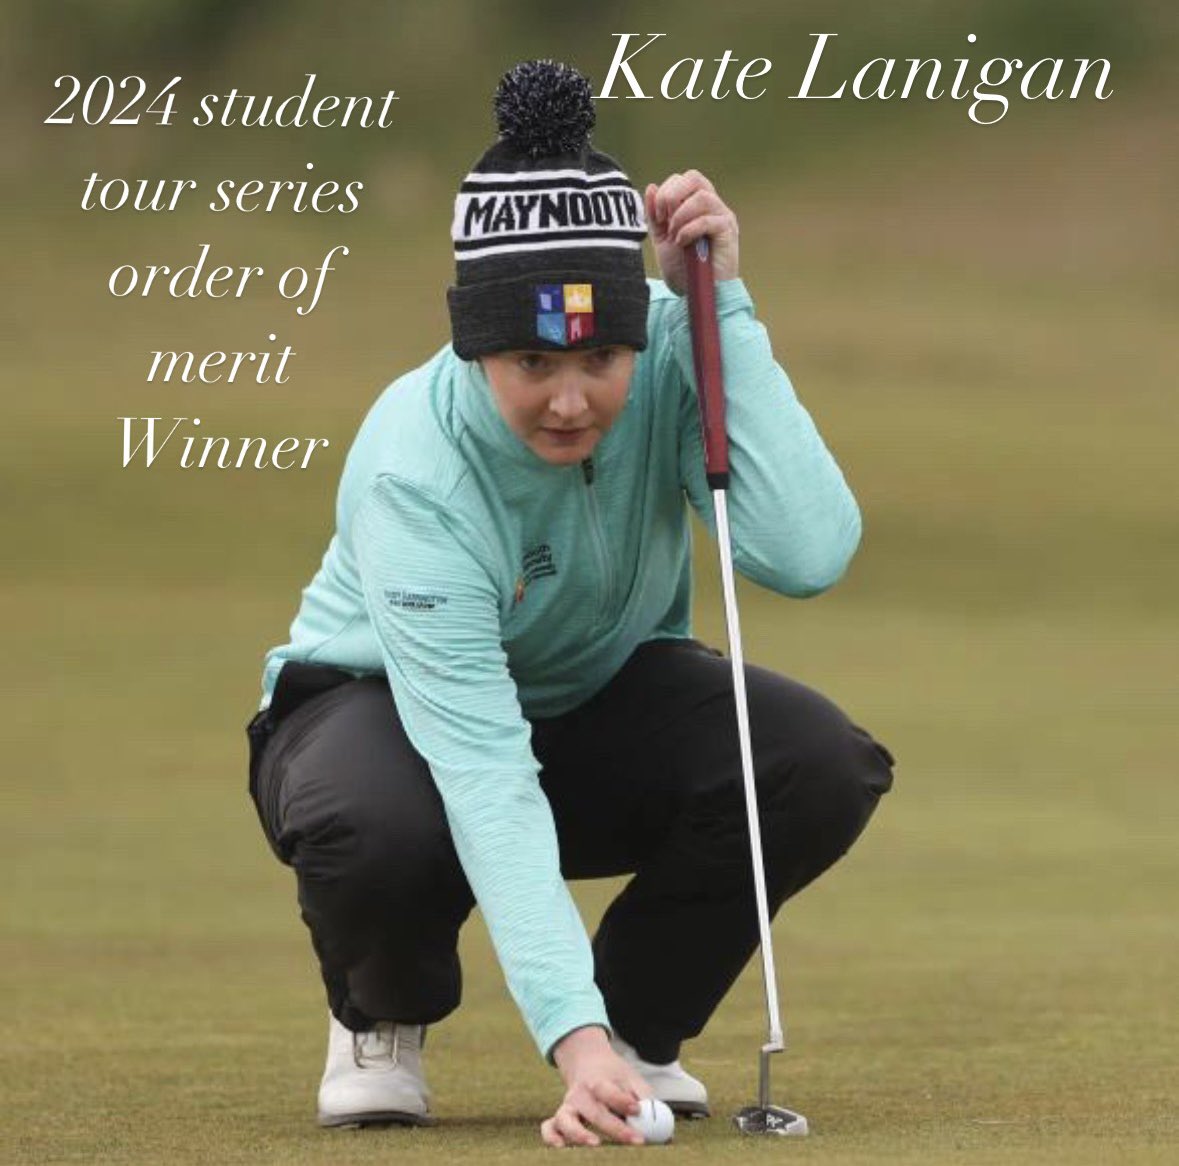 Congratulations Kate Kate Lanigan wins the student tour series Order of merit and will be heading to @LahinchGolfClub in July for the @ArnoldPalmerCup a great reward for a consistent season 👏👏👏👏